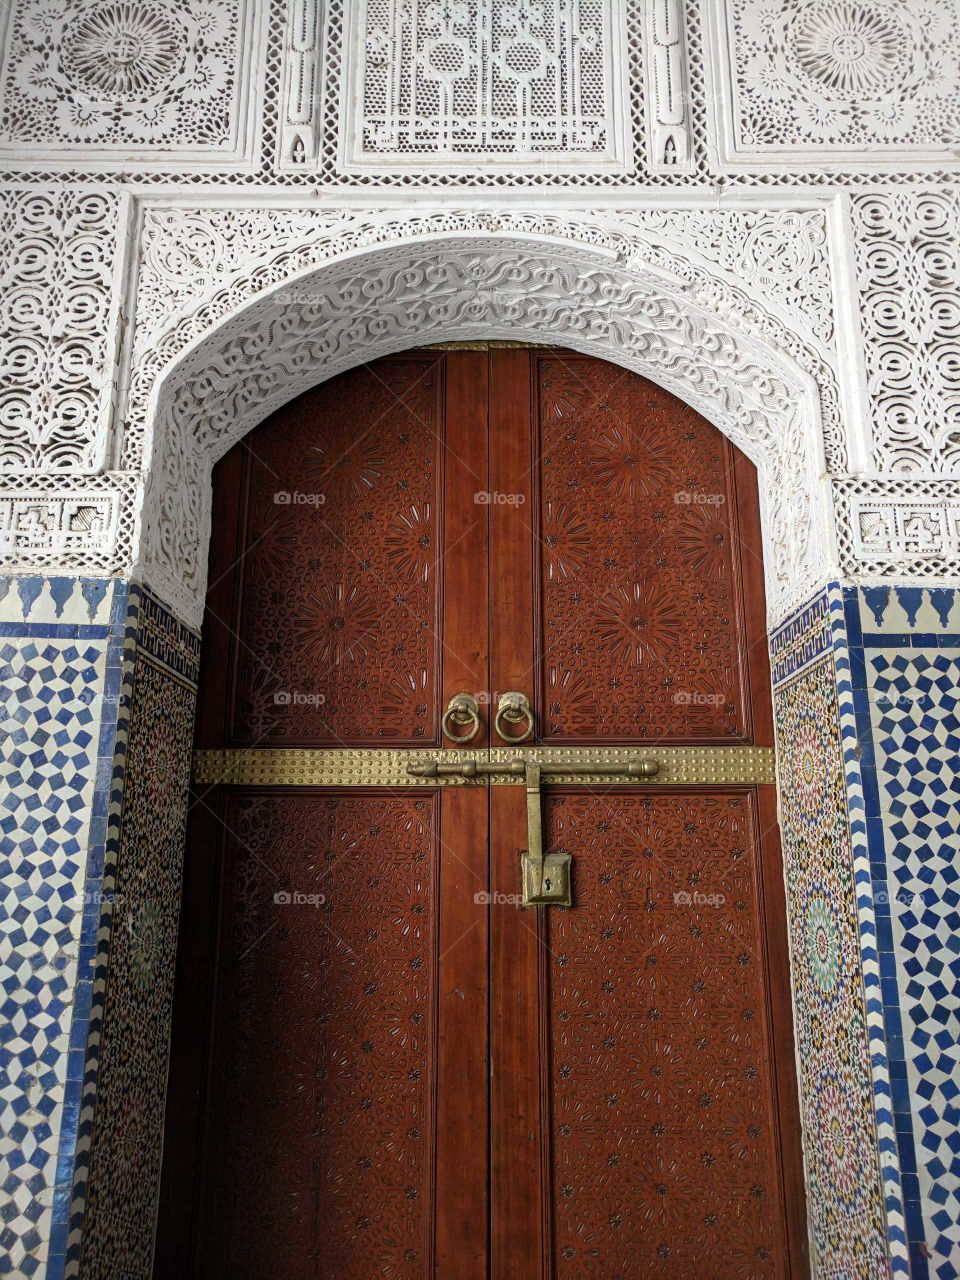 Beautiful, Ornate, Locked Door and Entrance to a House/Mosque/Building in the City of Meknes, Morocco (White Lace and Blue Ceramic Detailing Surrounded a Wood Door Locked with a Gold Lock)